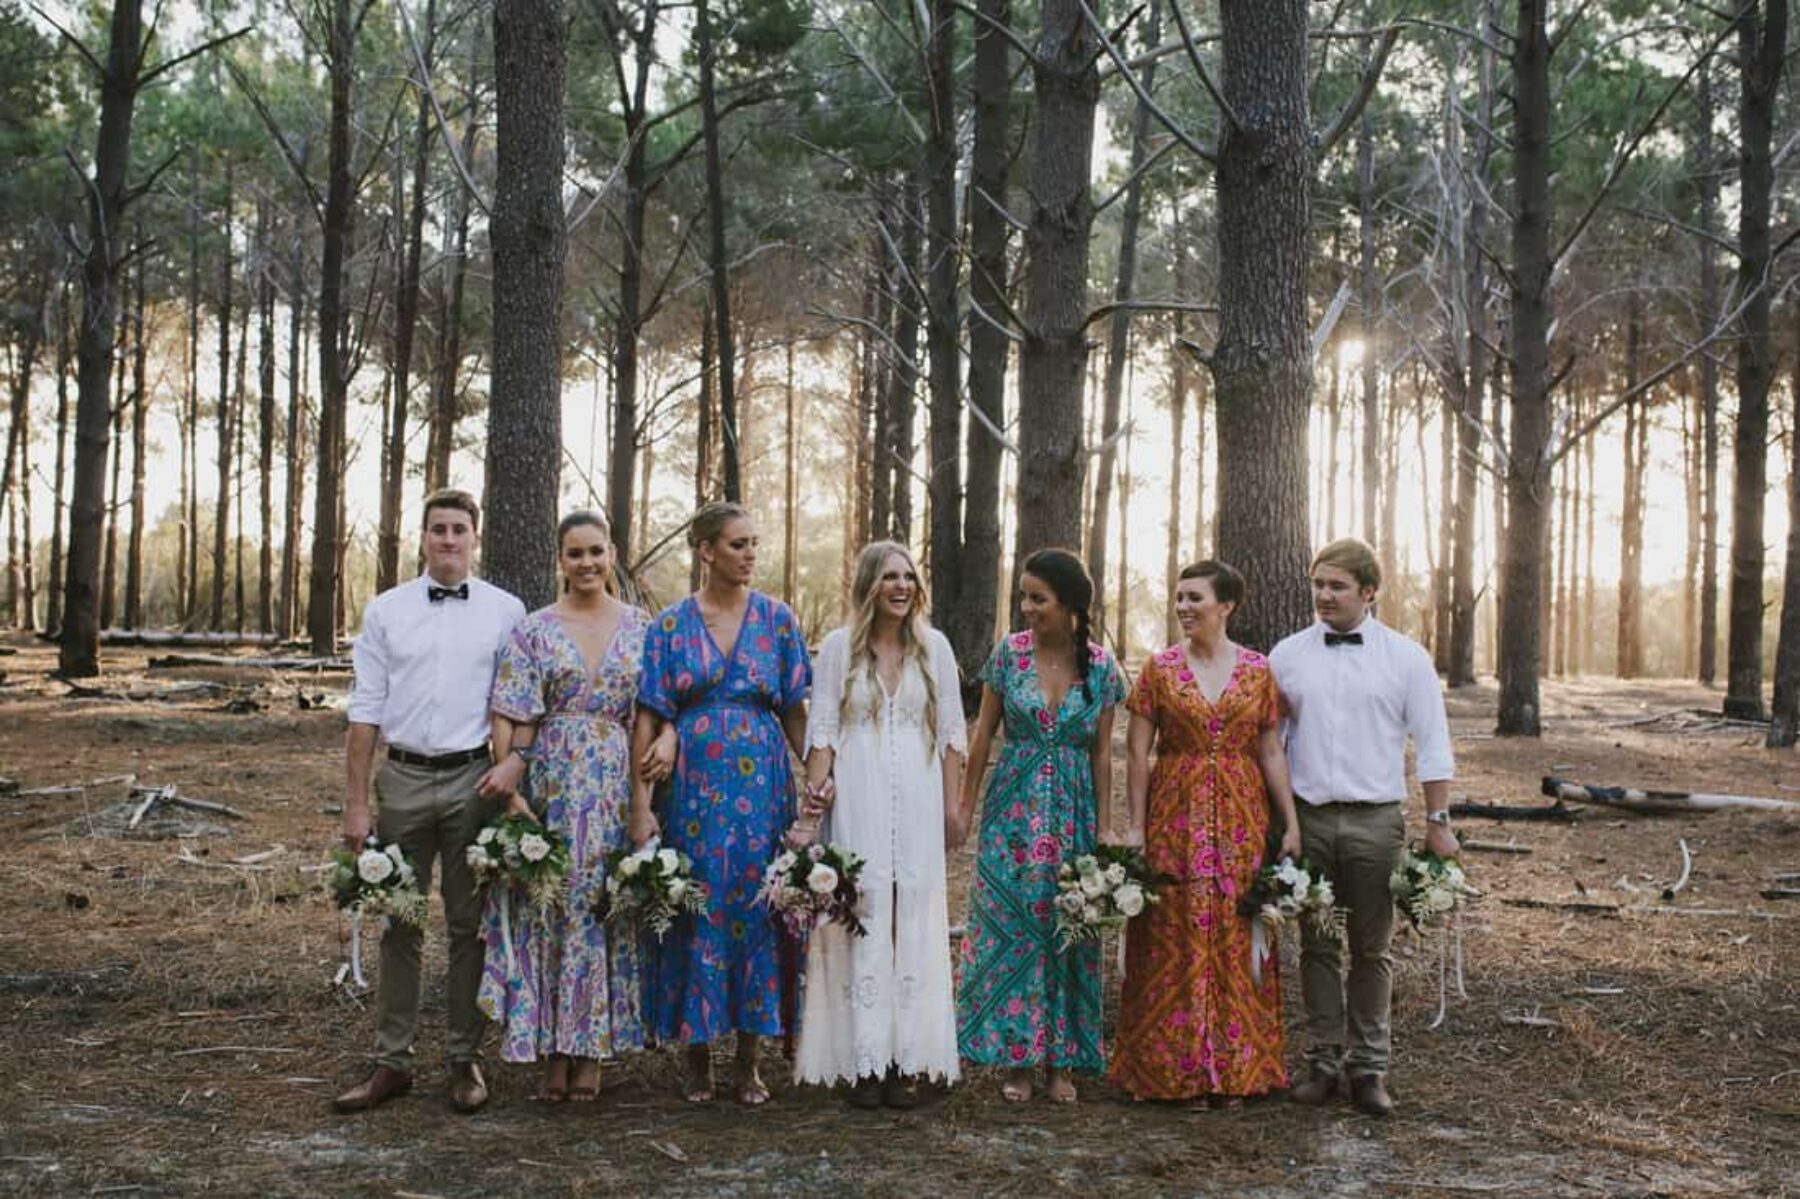 mixed floral print bridesmaid dresses by Spell Designs